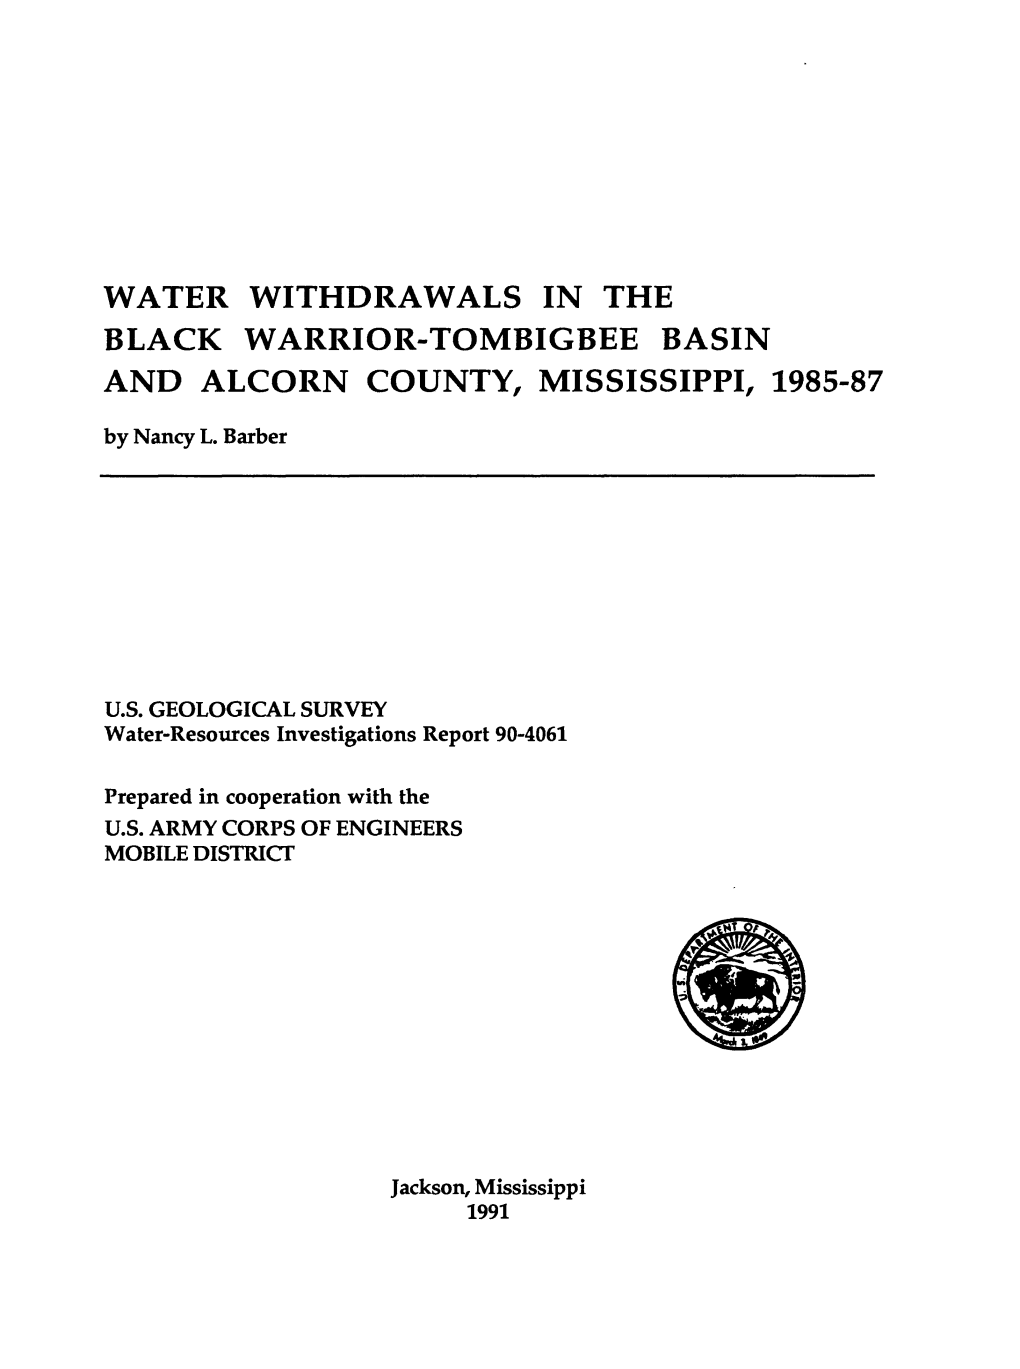 WATER WITHDRAWALS in the BLACK WARRIOR-TOMBIGBEE BASIN and ALCORN COUNTY, MISSISSIPPI, 1985-87 by Nancy L